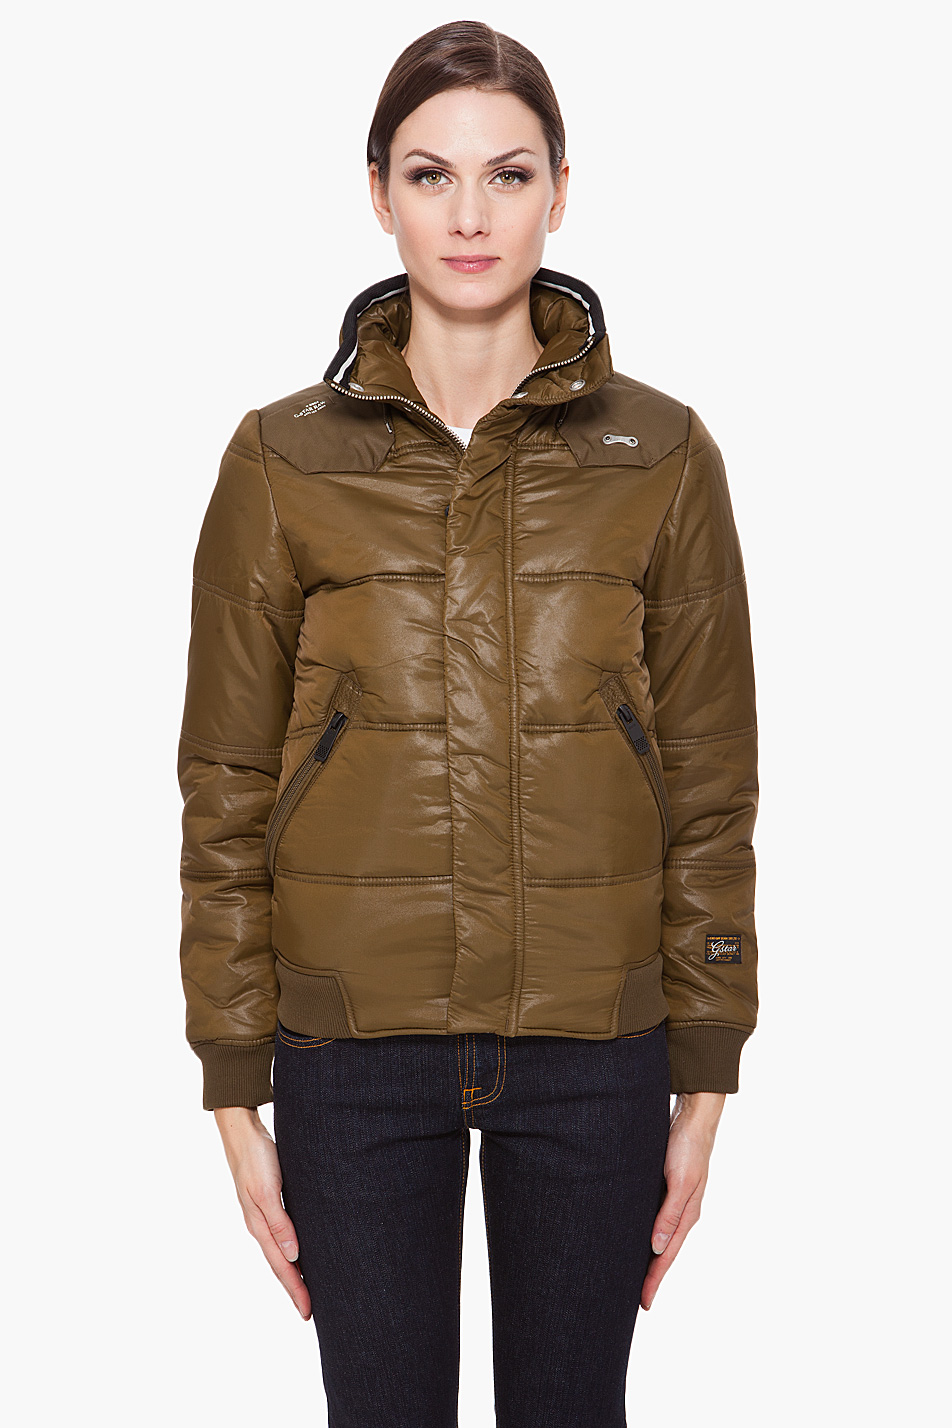 G-Star RAW Nordic Whistler Bomber Jacket in Olive (Green) - Lyst